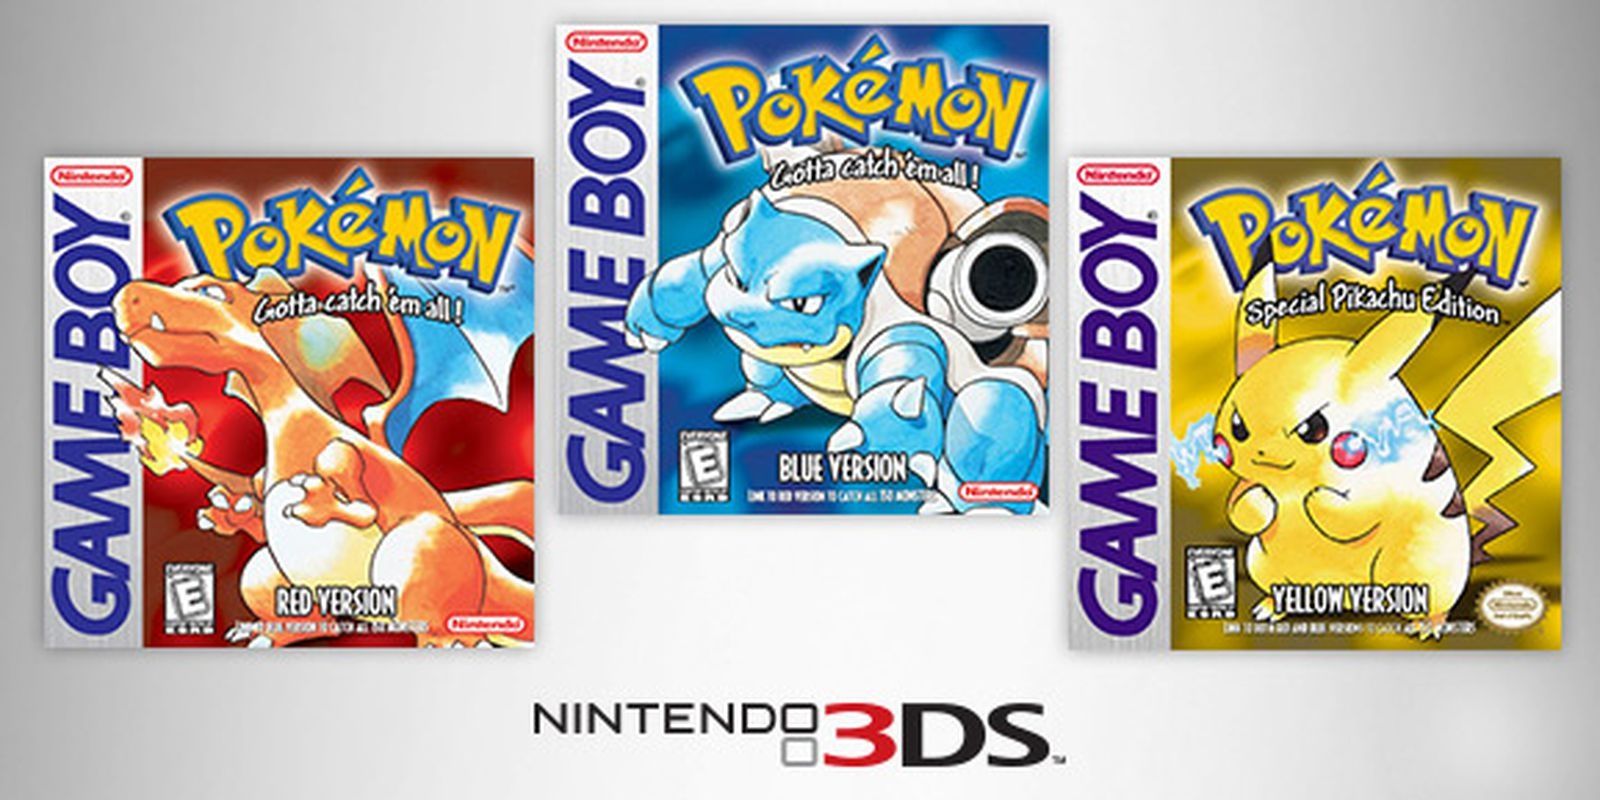 The 3DS is the best Nintendo console to enjoy as many Pokémon games as possible.